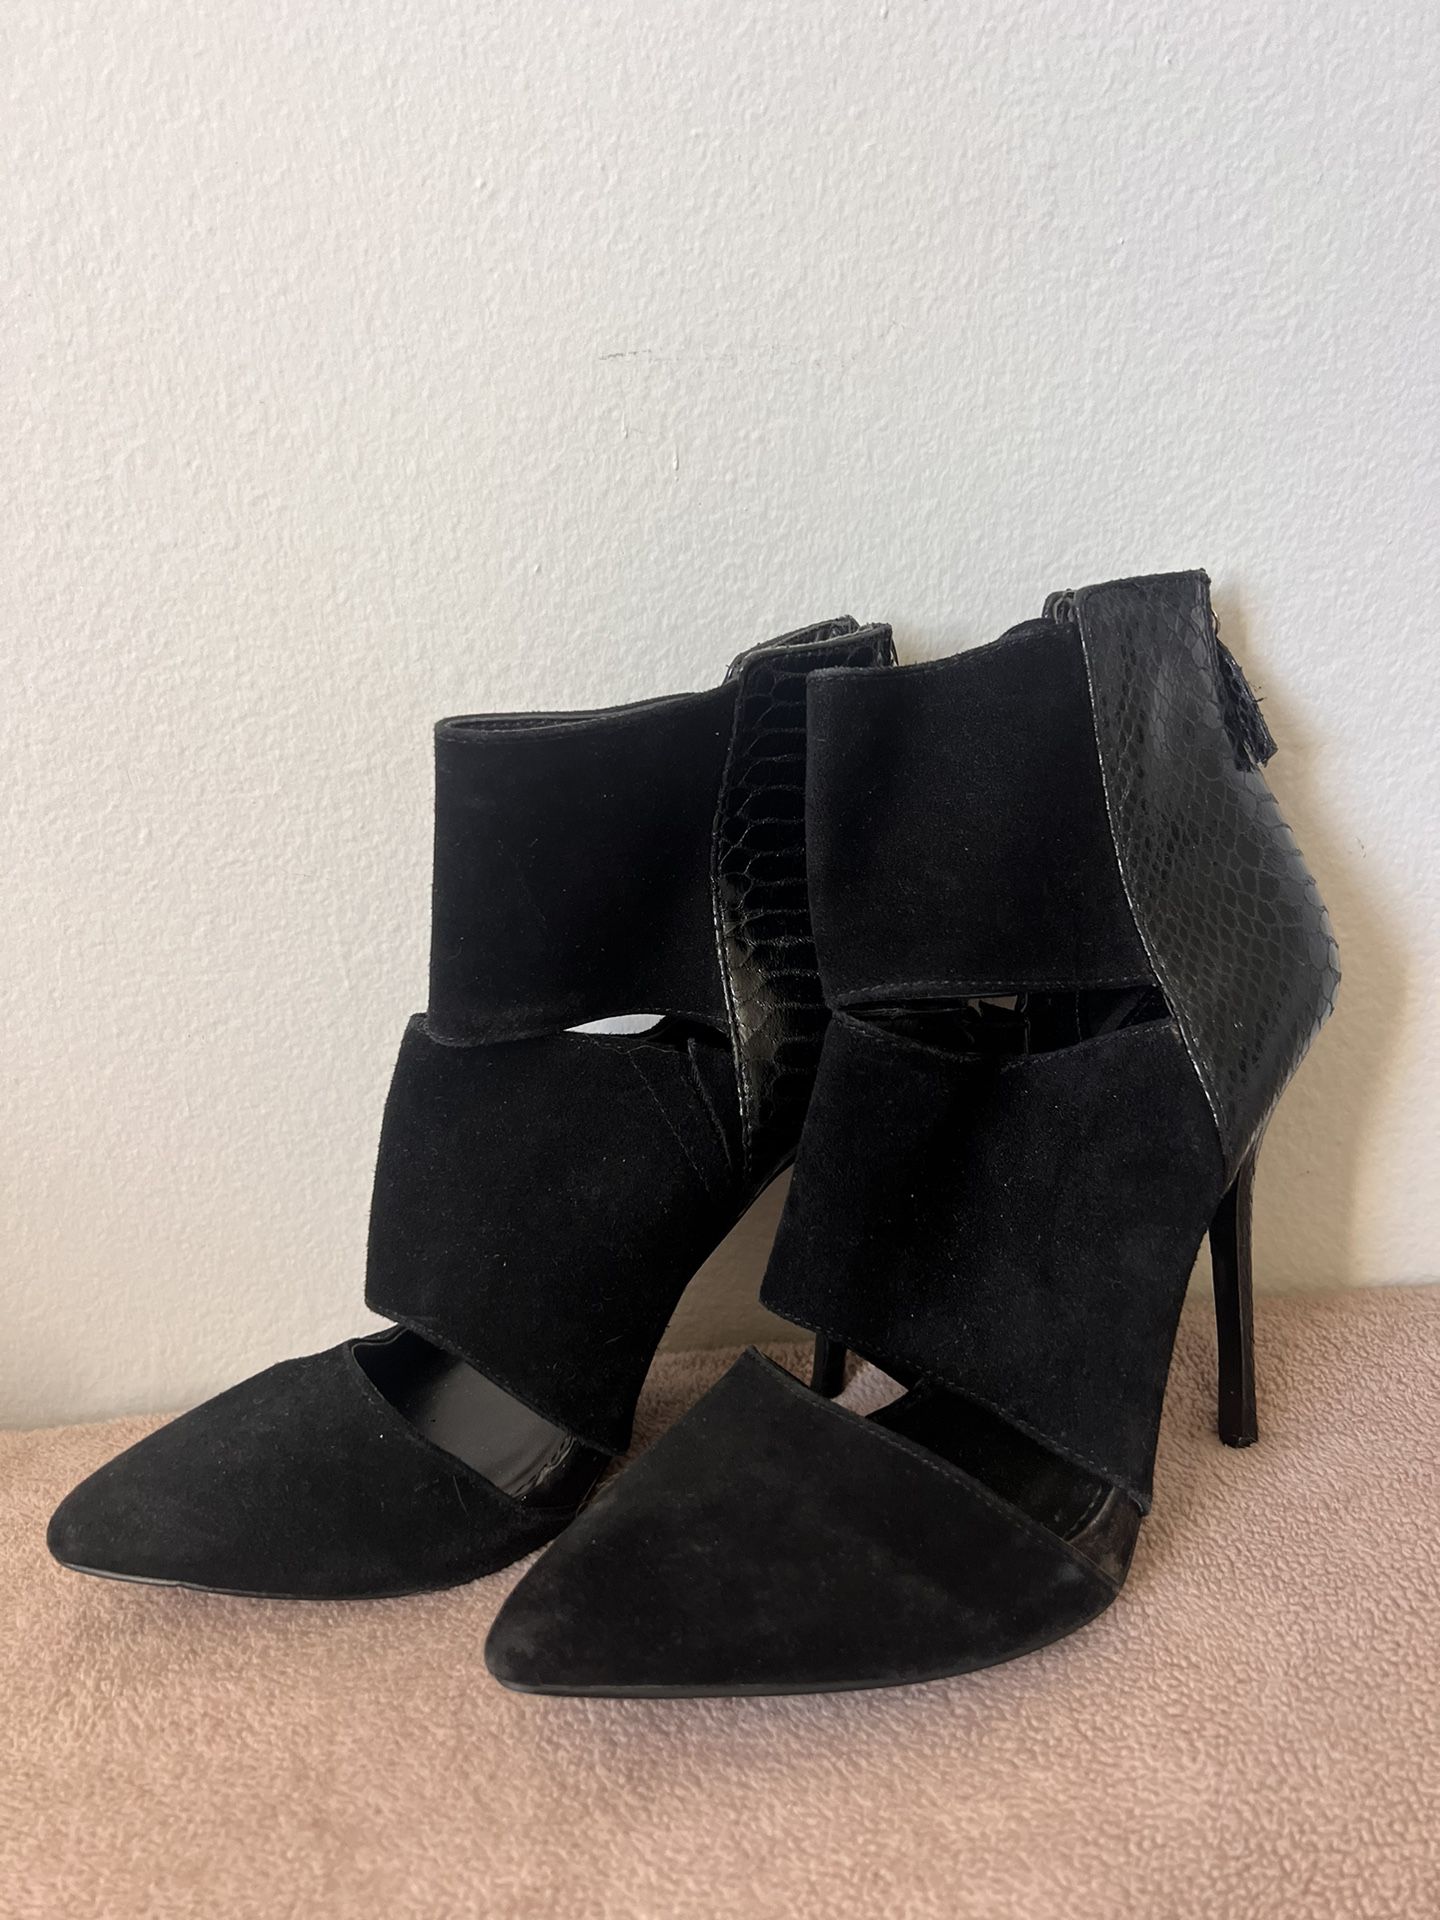 Steve Madden Black Ankle Boots Heals With Zipper Size 7